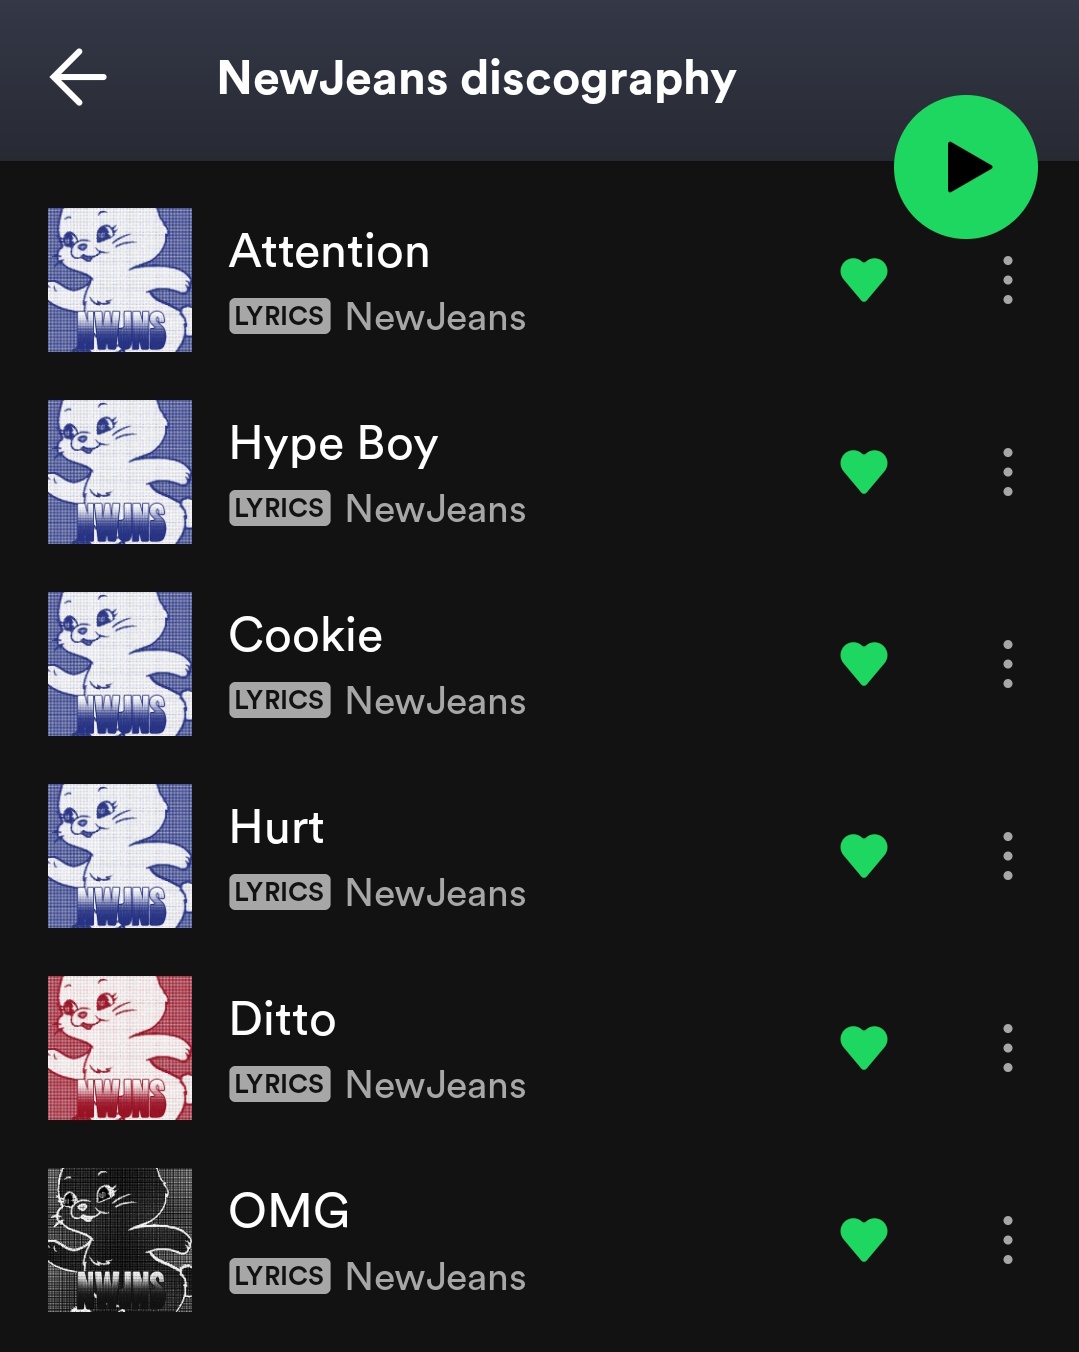 Spotify lyrics, newjeans ditto in 2023